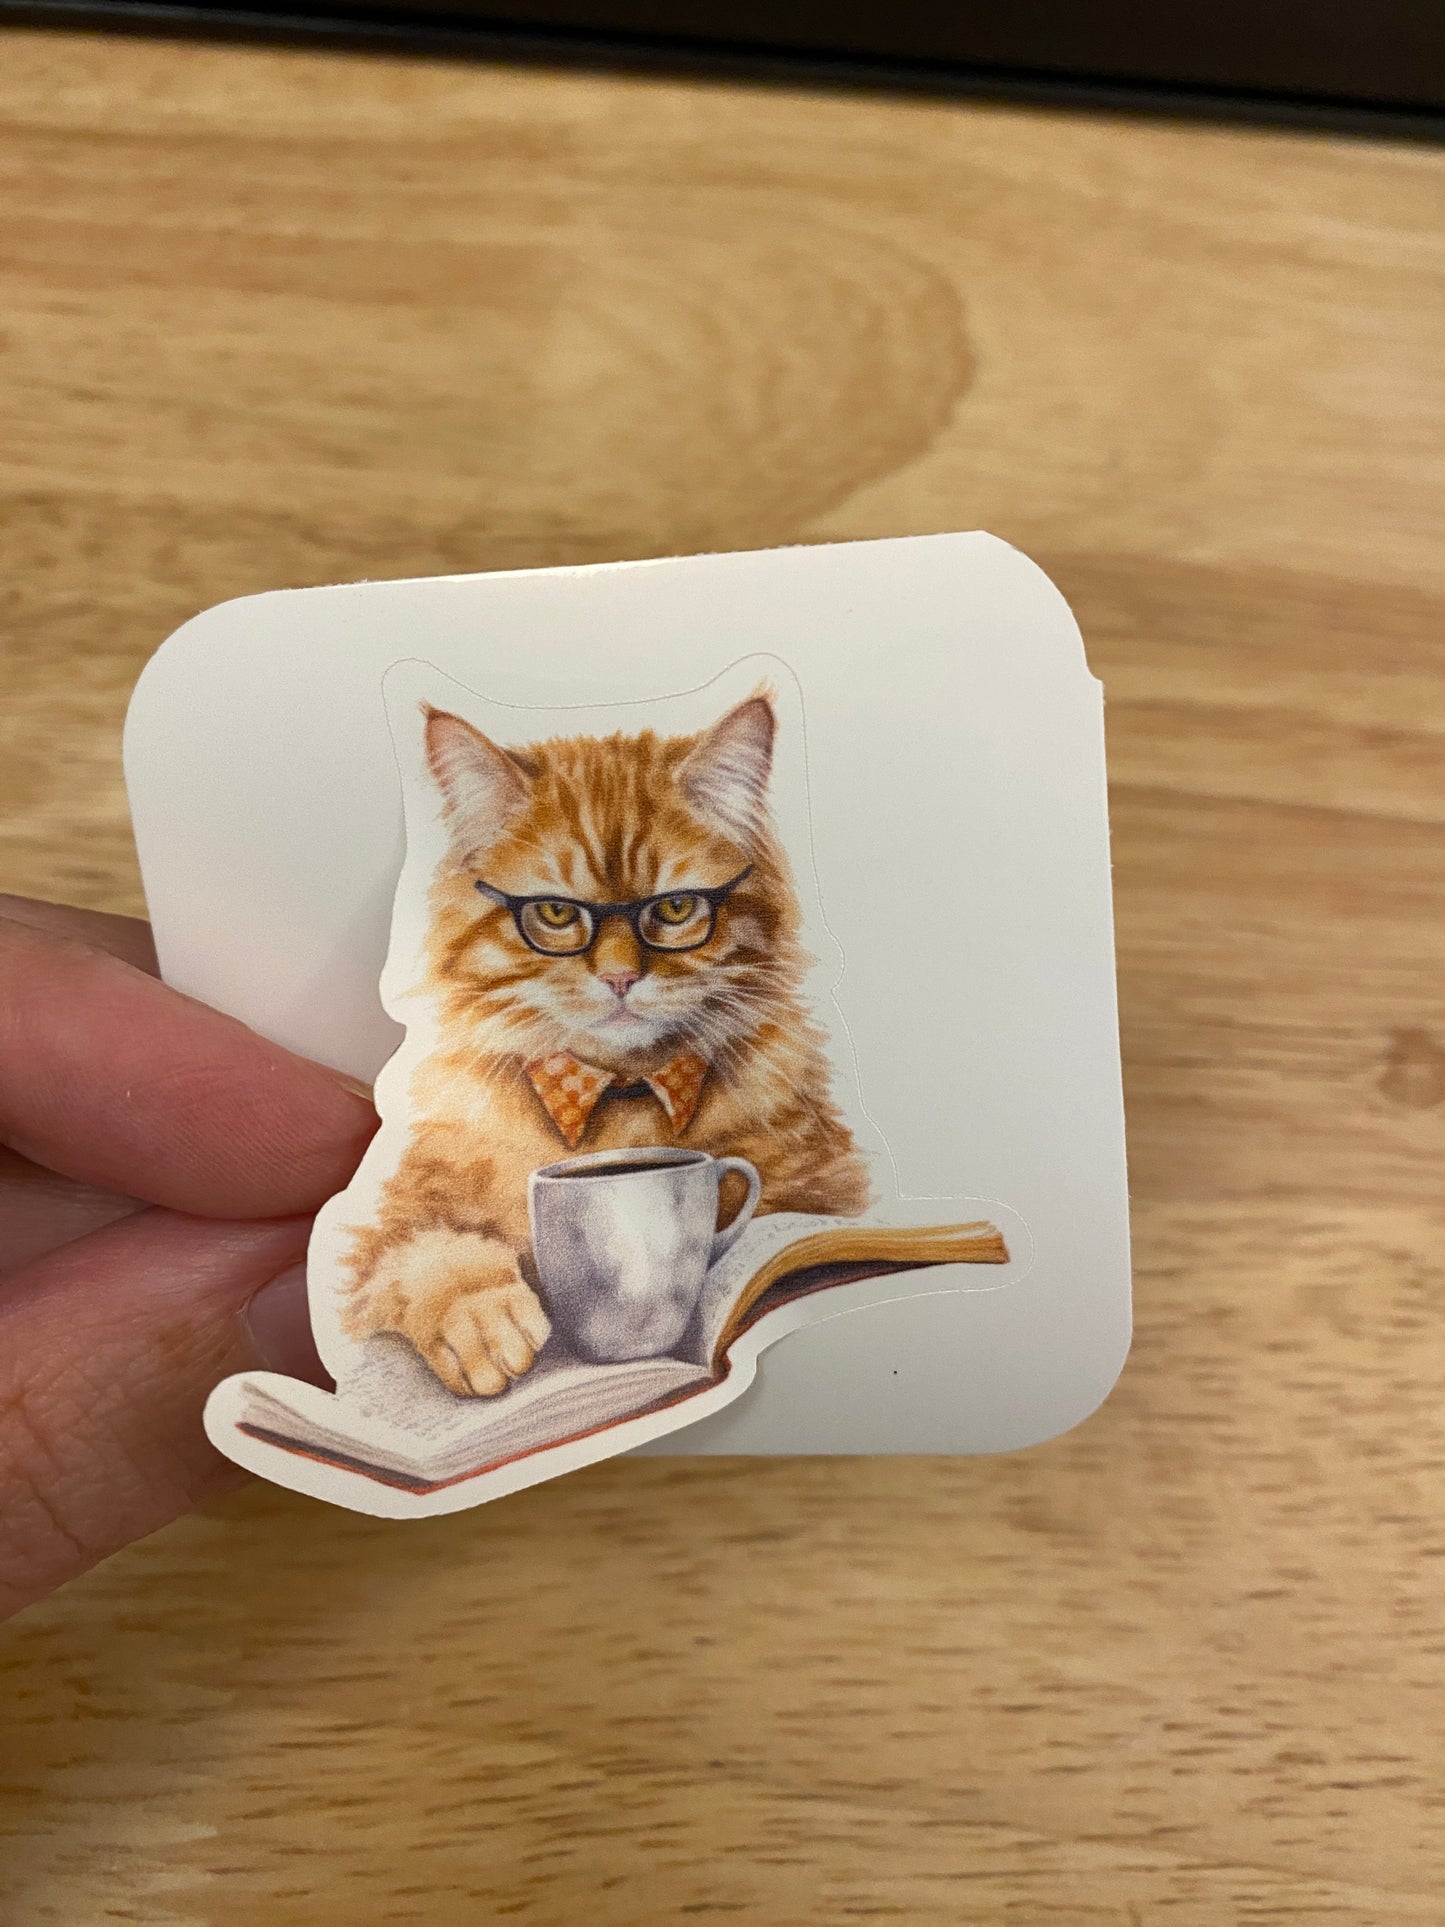 Cat reading and Coffee Sticker, Red Cat Sticker, Cute Cat with Paper Sticker, Yellow Cat Sticker, cat sticker, Funny Cat sticker